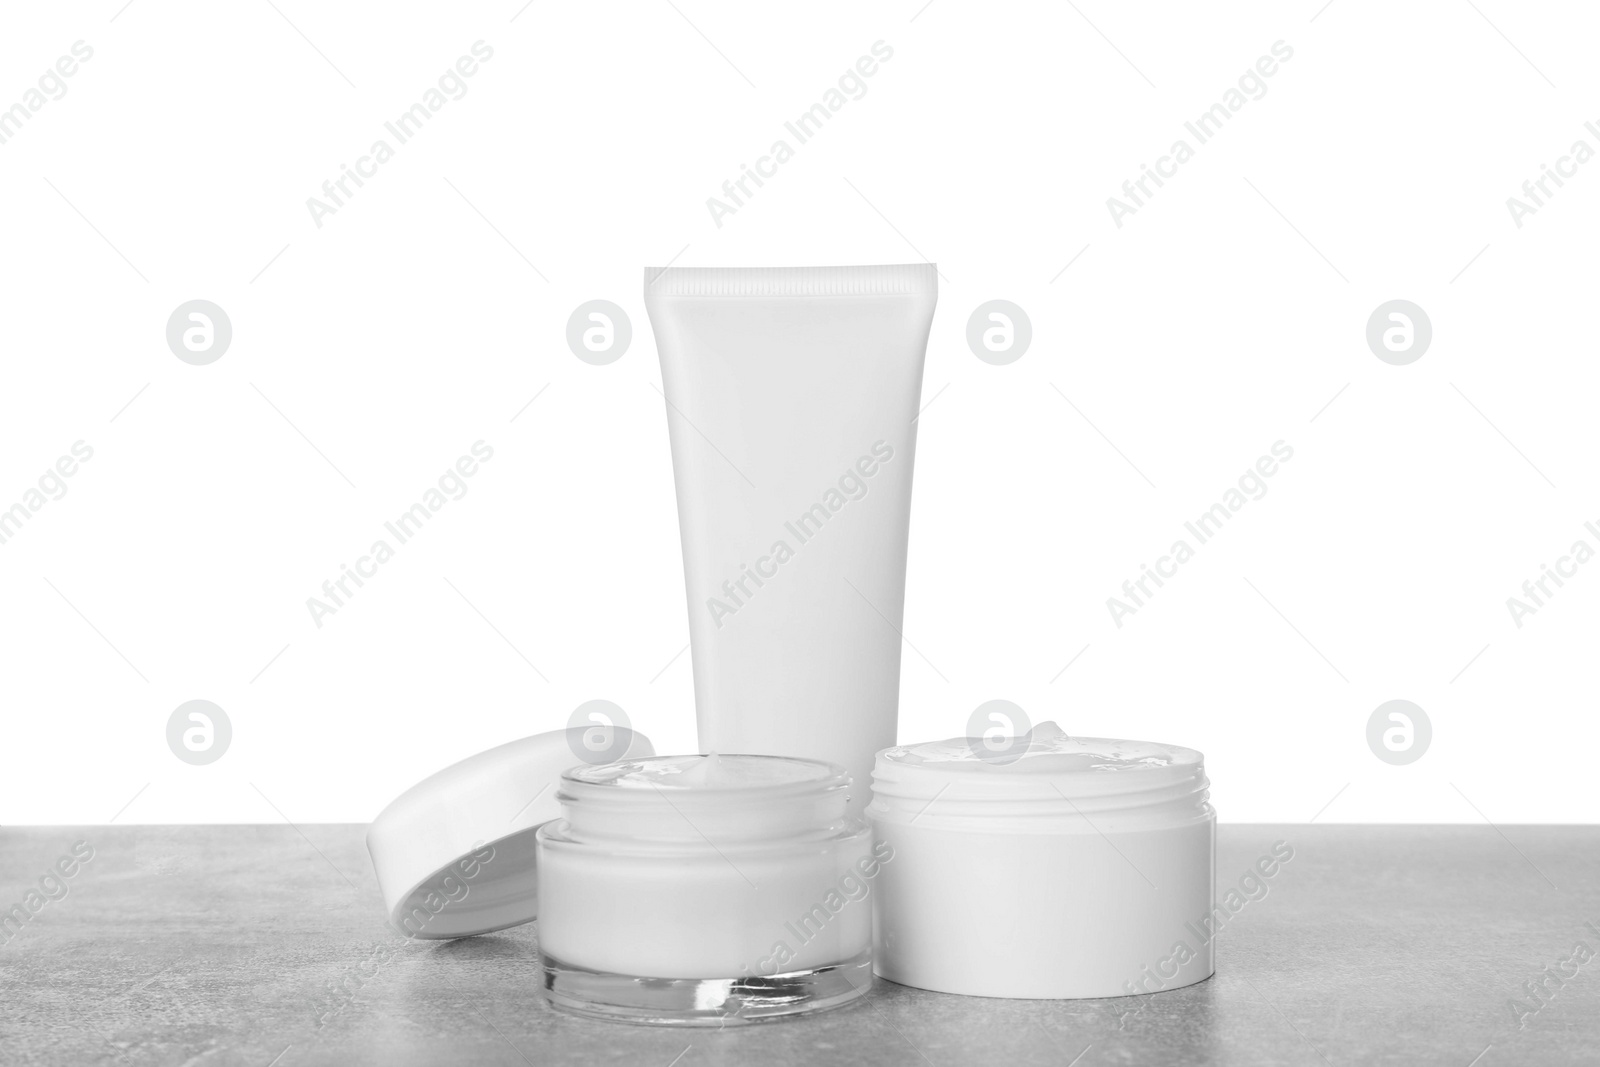 Photo of Jars and tube of hand cream on gray table against white background